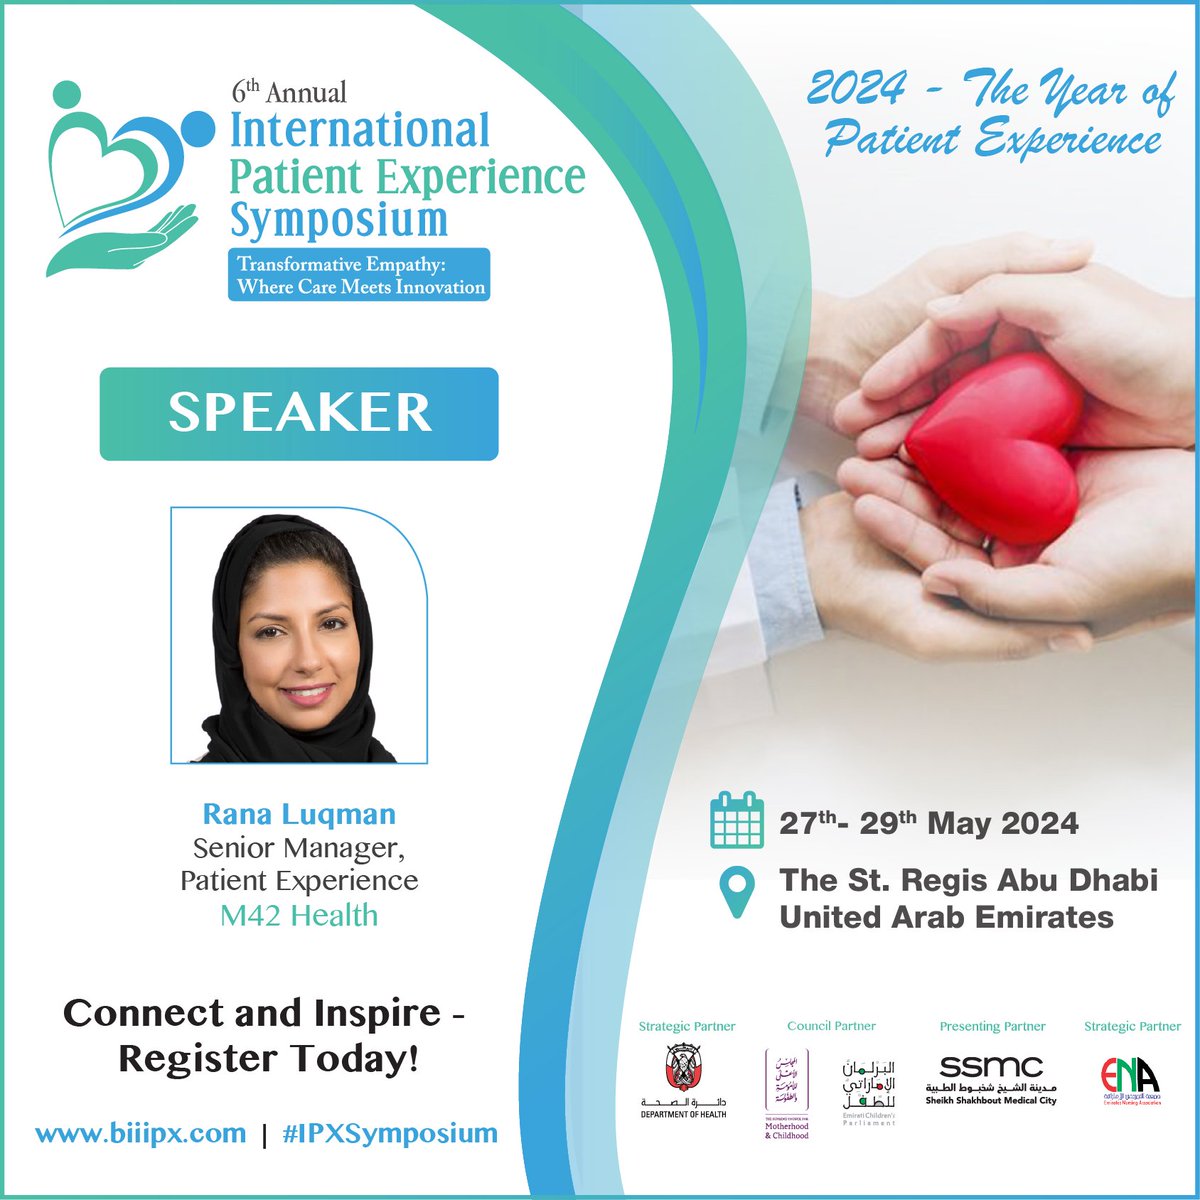 Meet Rana Luqman, Senior Manager of #PatientExperience at @M42Health, a distinguished speaker at the upcoming 6th Annual #patient Experience Symposium!🔗Register Now: biiipx.com/register
#IPXSymposium #IPX #PX2024 #HealthcareRevolution #PatientCentric #PatientEngagement